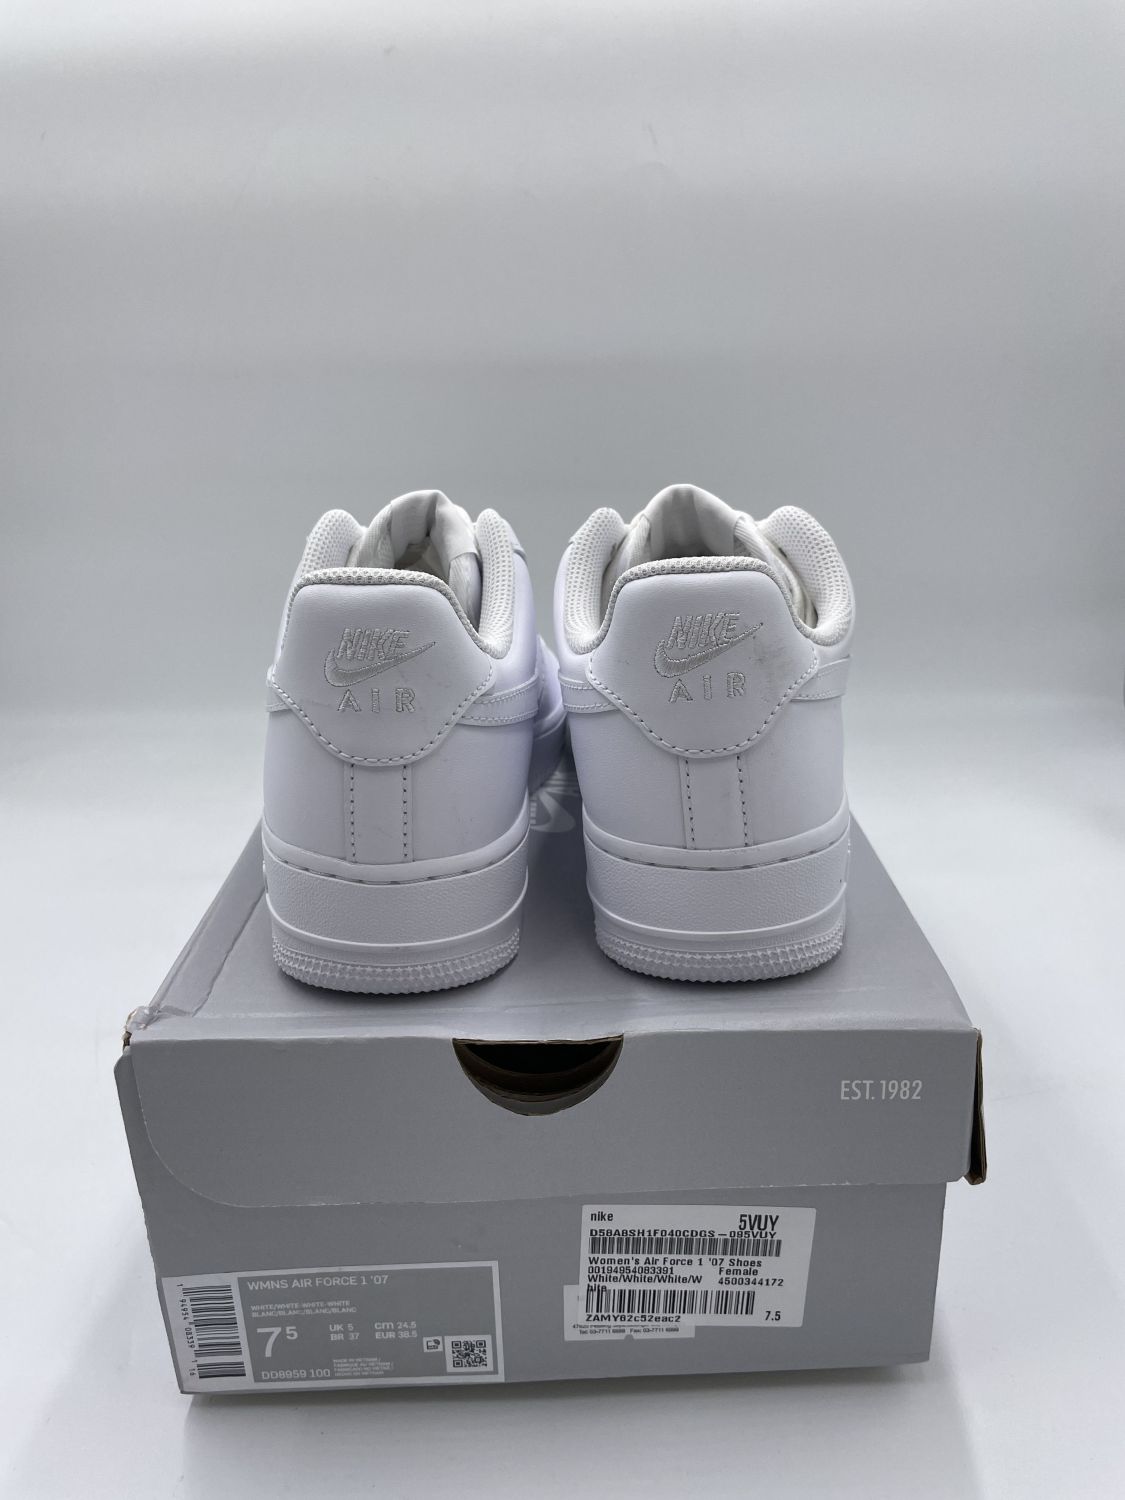 17342 - Nike Air Force 1 Low 07 White (Womens) | Item Details - AfterMarket